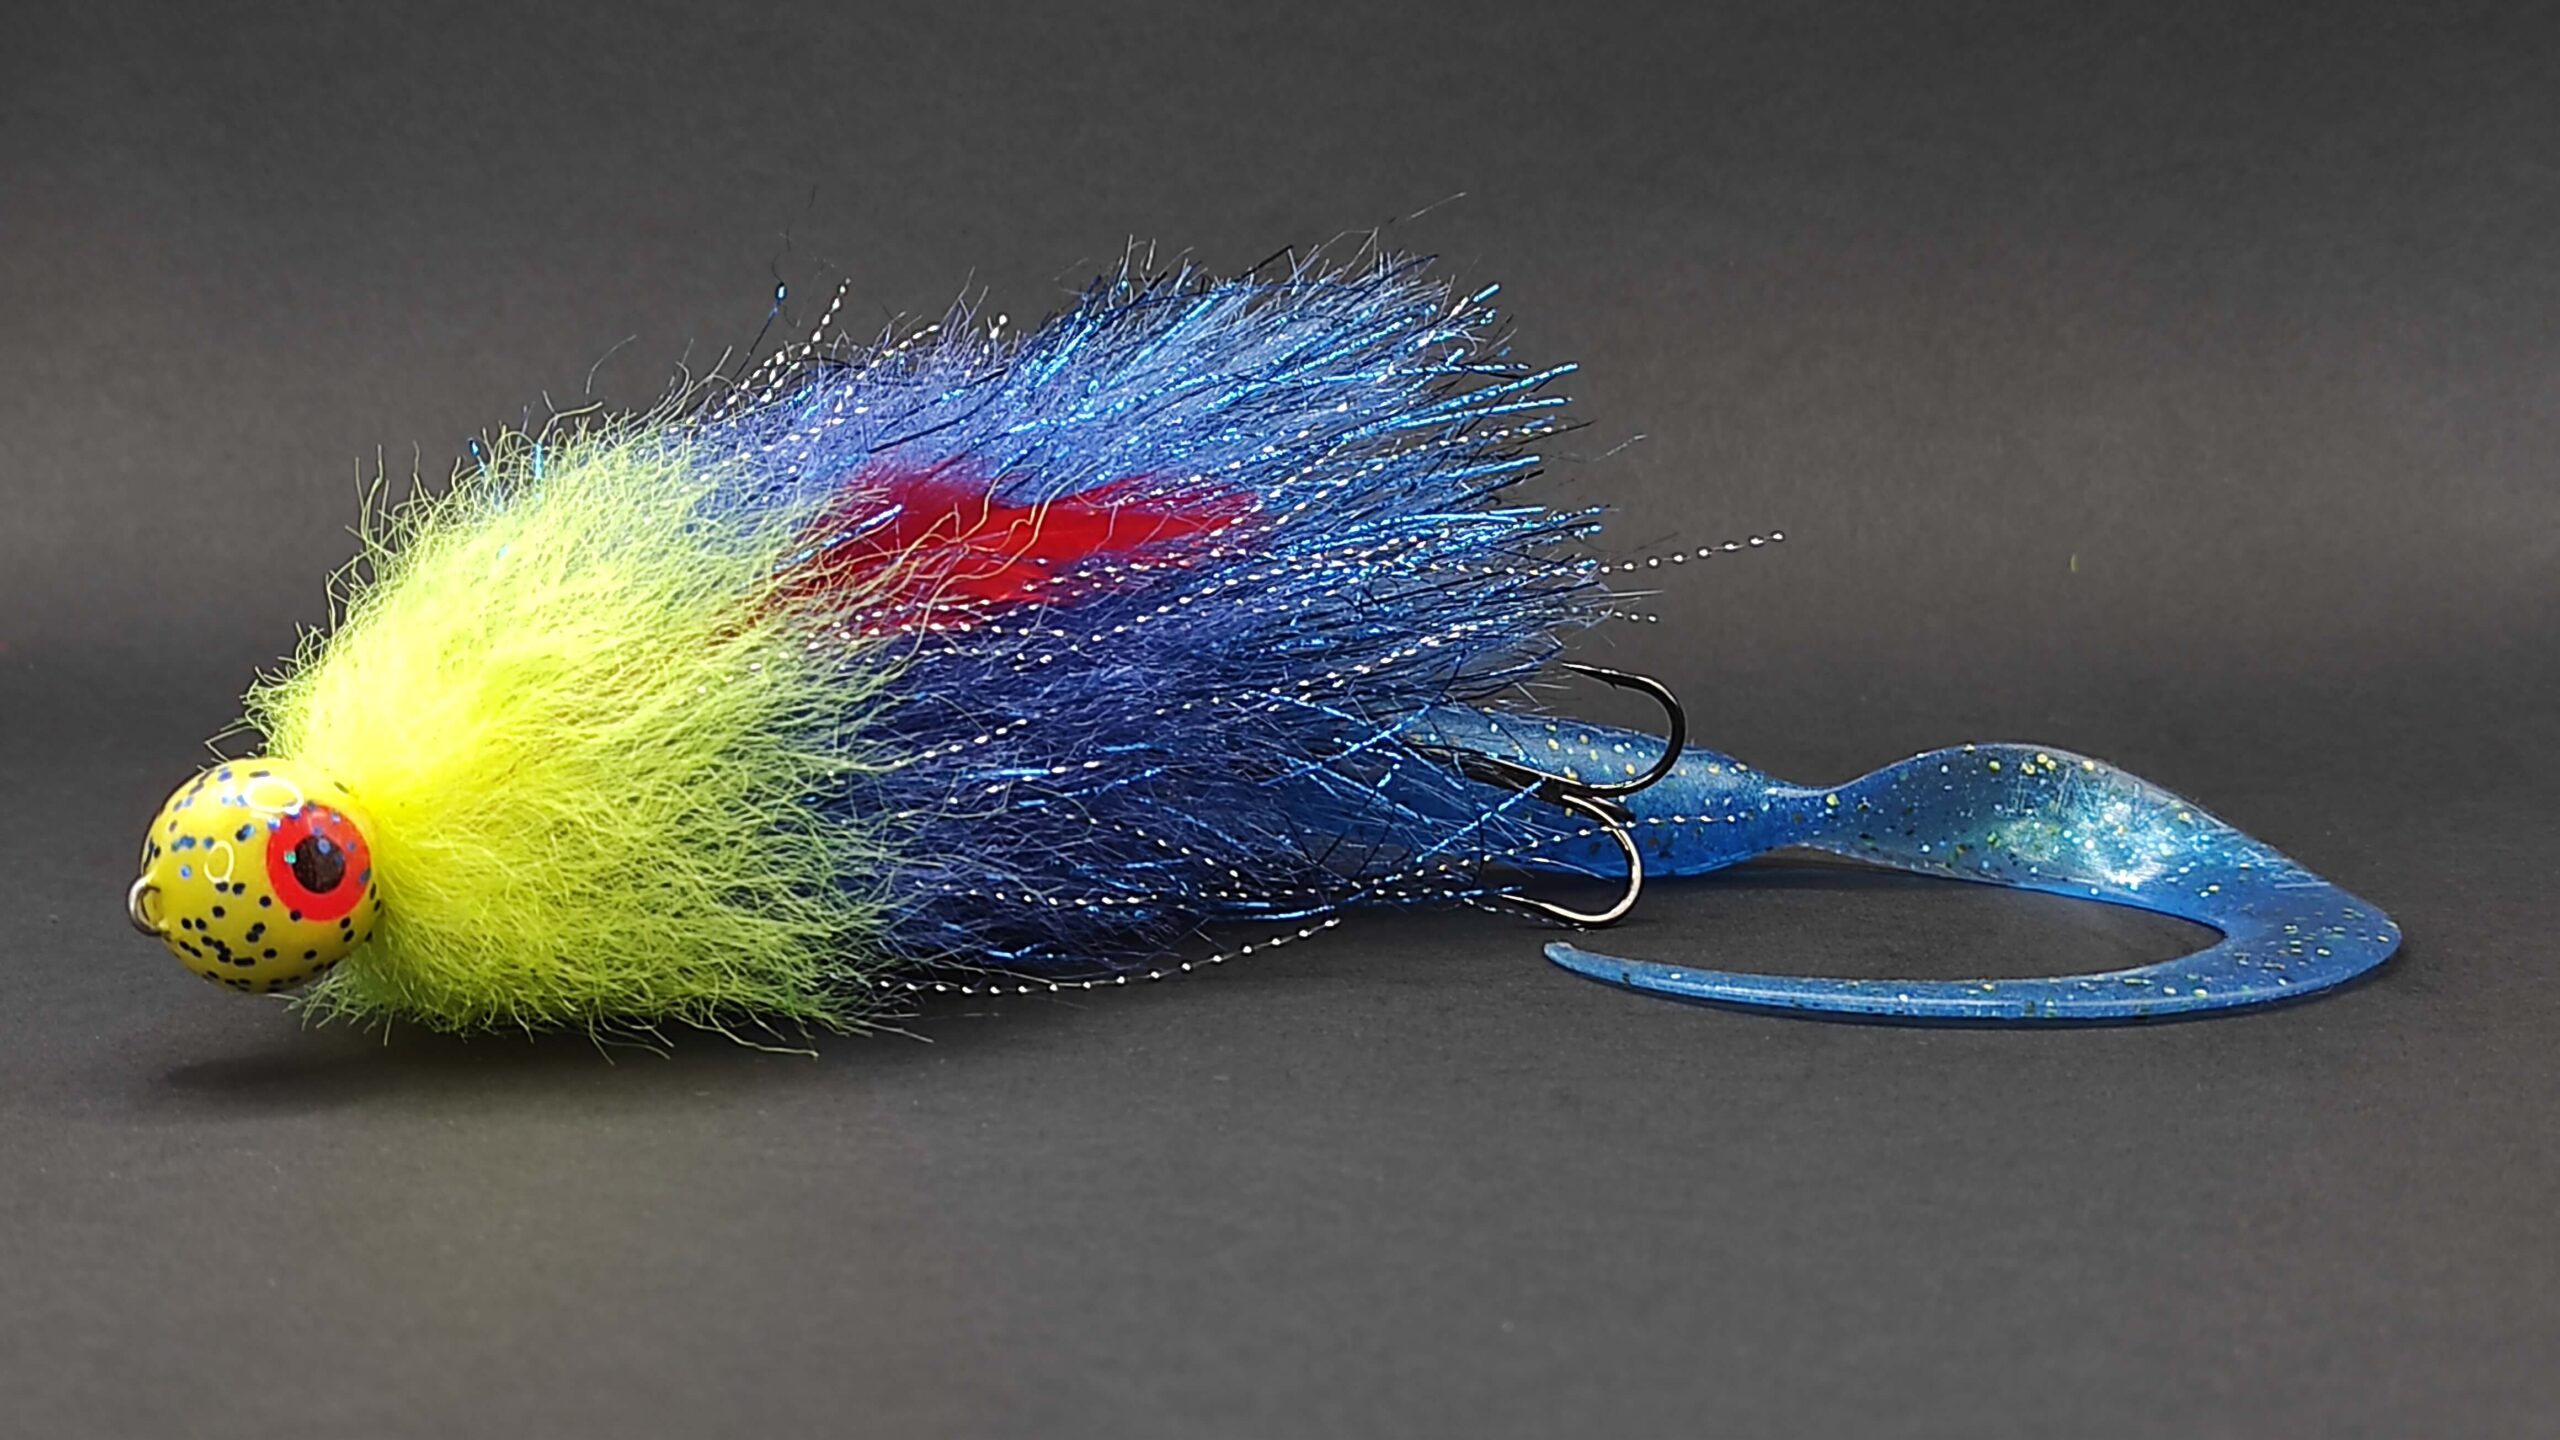 50gr. 30cm. 2x treble hook 1_0 Yellow Blue - Crafted Catches Lures Made  with Precision and Passion